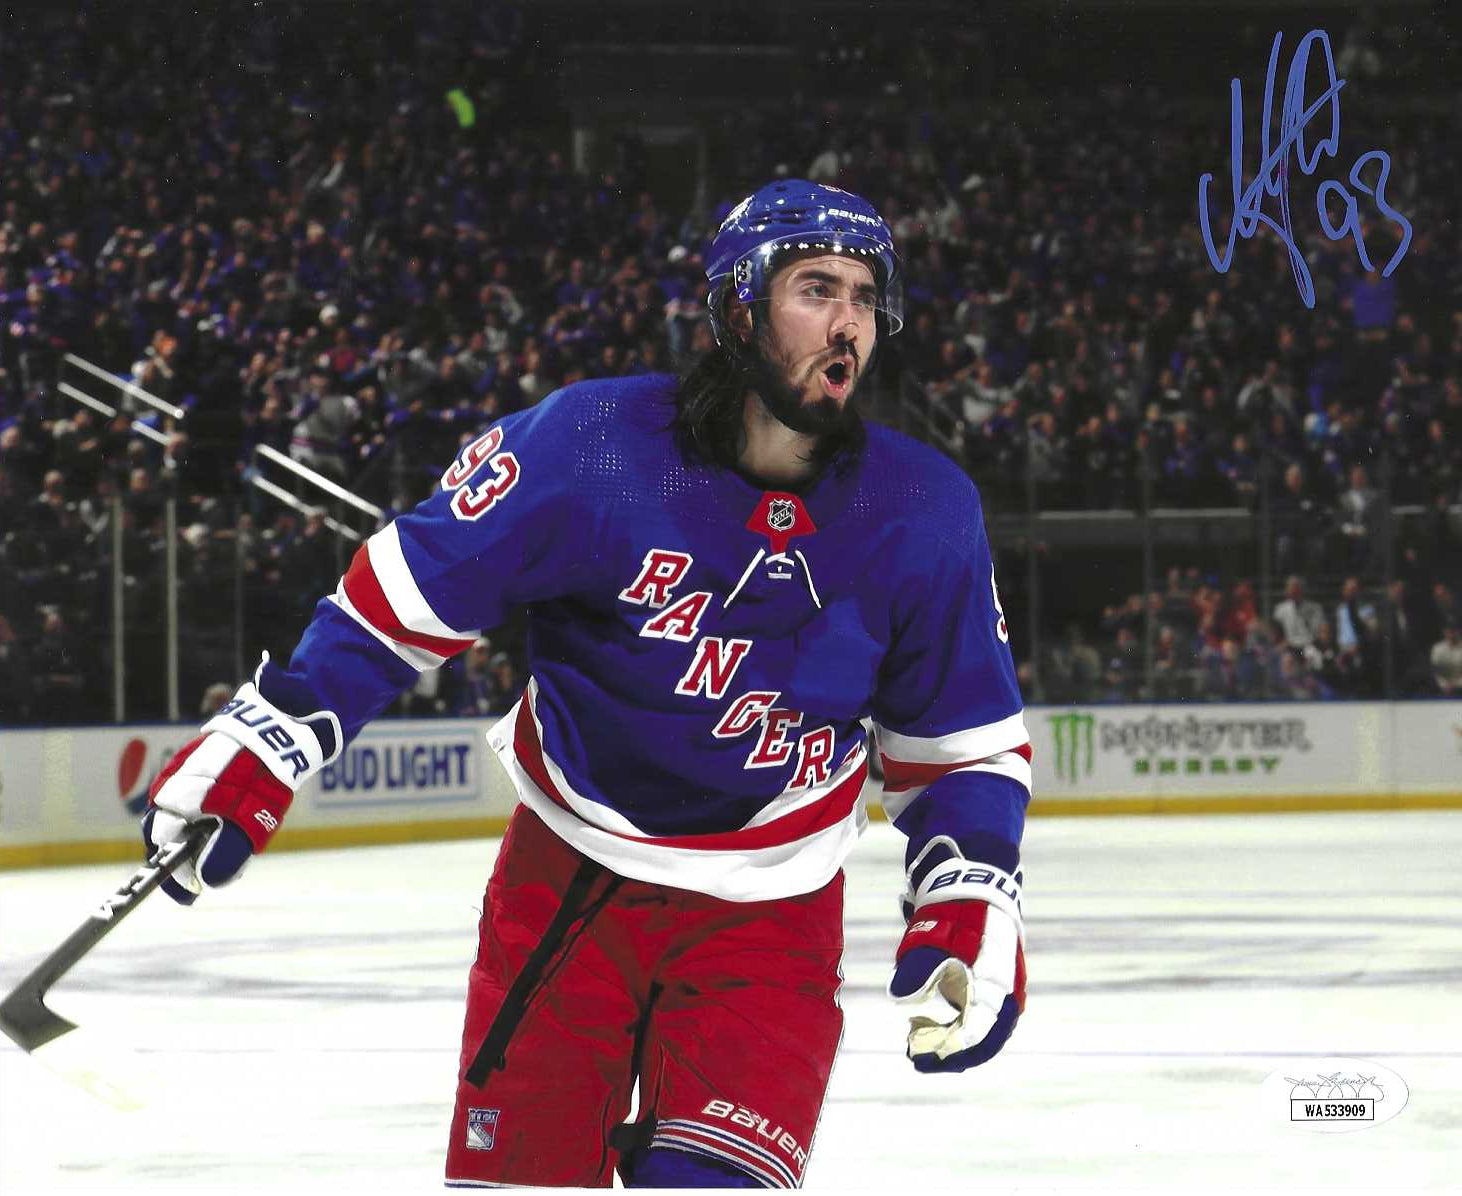 The New York Rangers Mika Zibanejad Autographed 8x10 Action Photo Picture